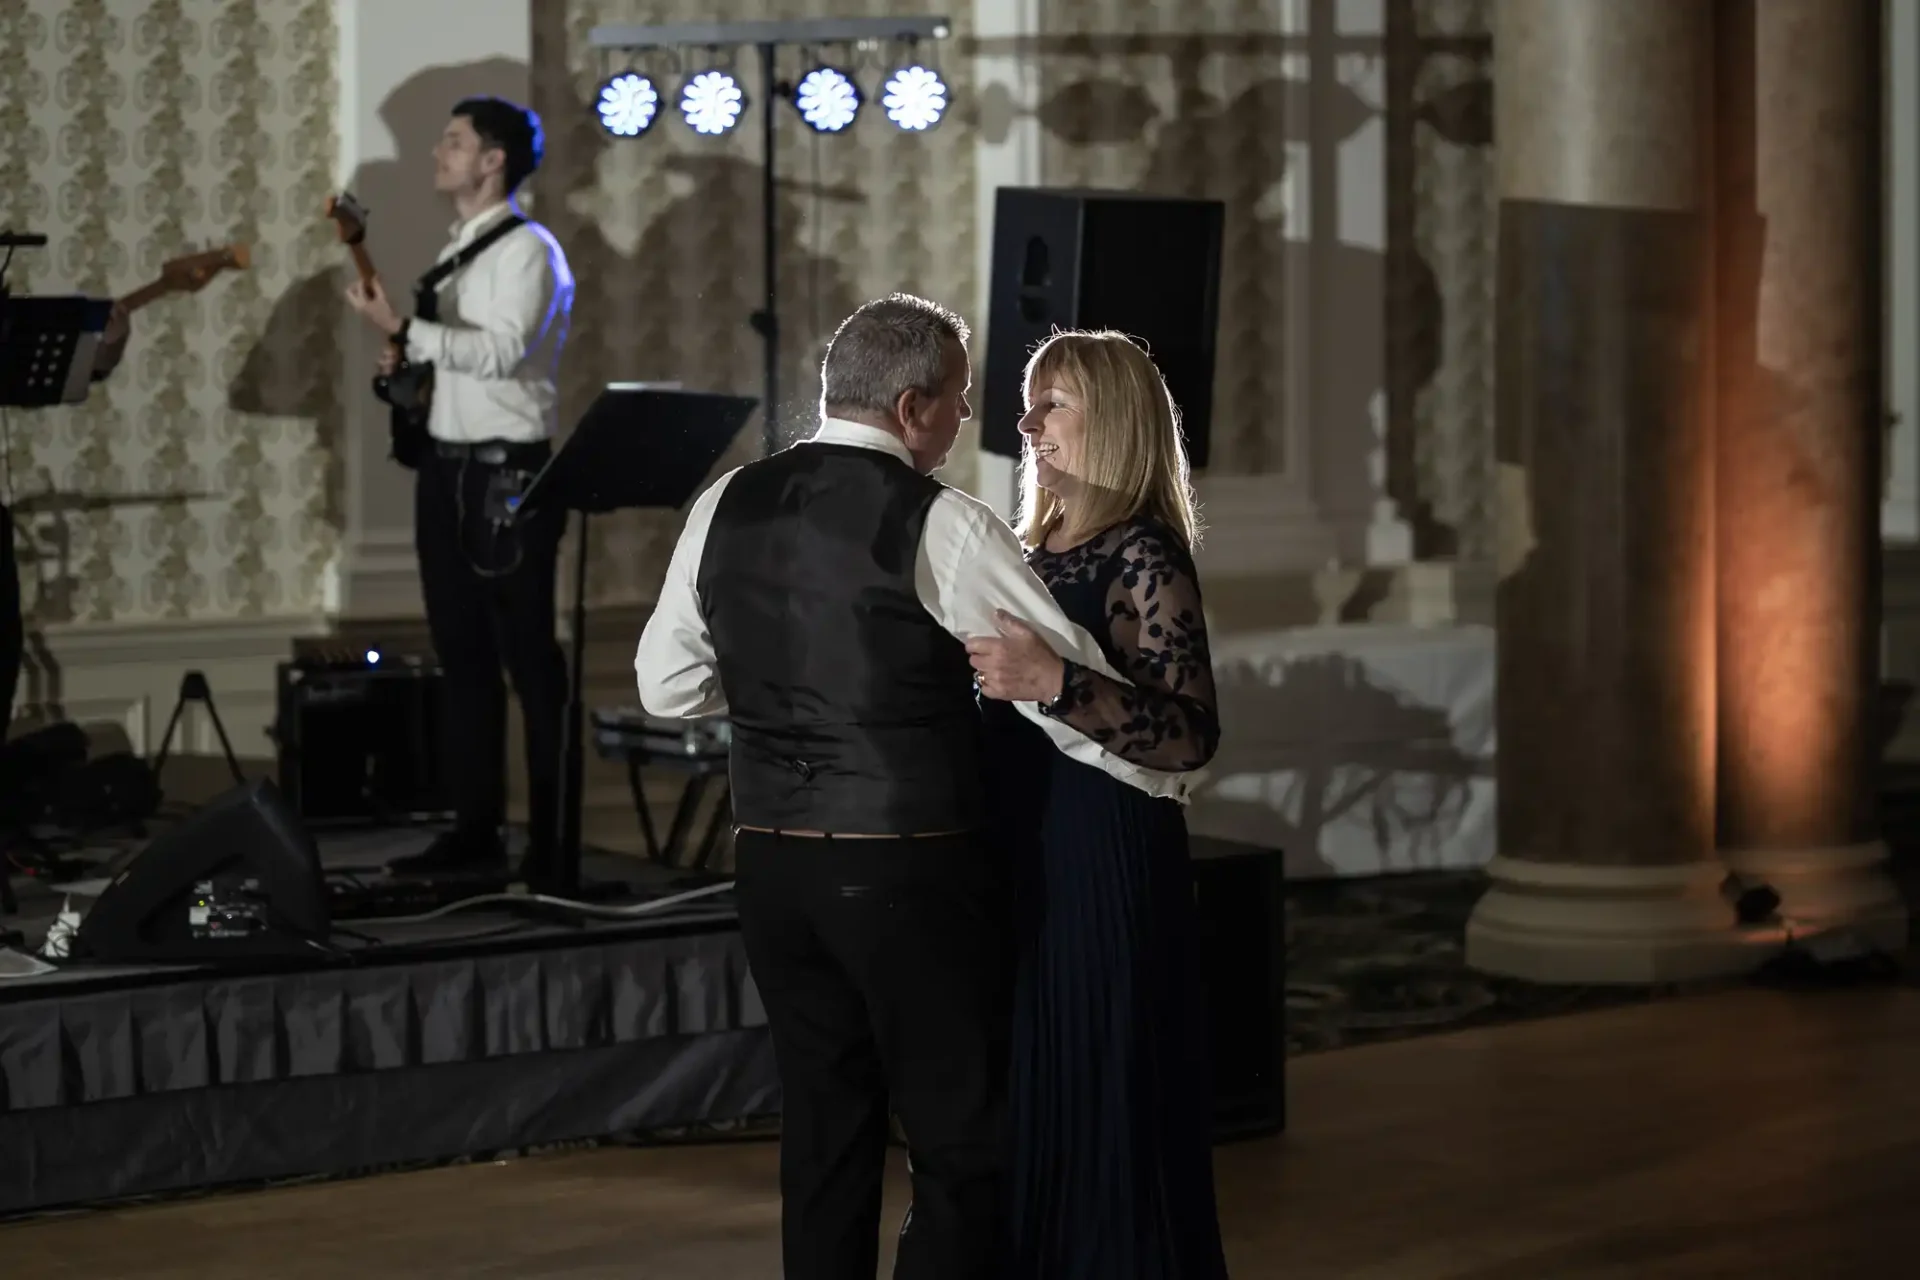 A couple dances closely at an elegant event while a musician performs in the background under blue lights.